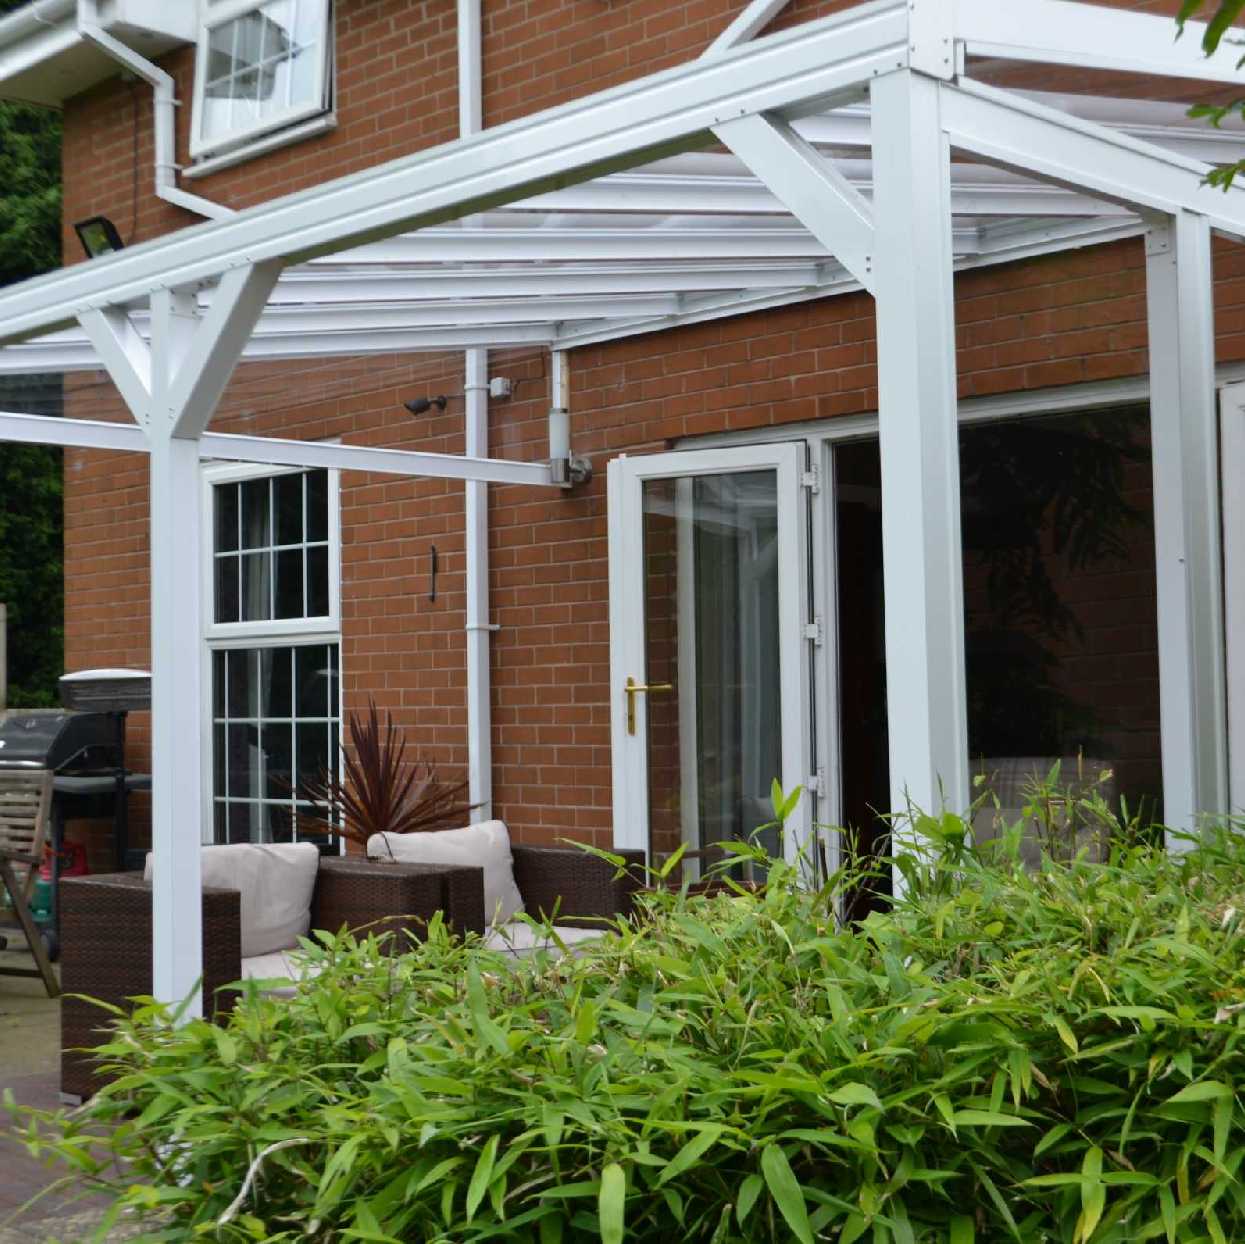 Omega Smart Lean-To Canopy, White with 6mm Glass Clear Plate Polycarbonate Glazing - 2.8m (W) x 2.0m (P), (2) Supporting Posts from Omega Build